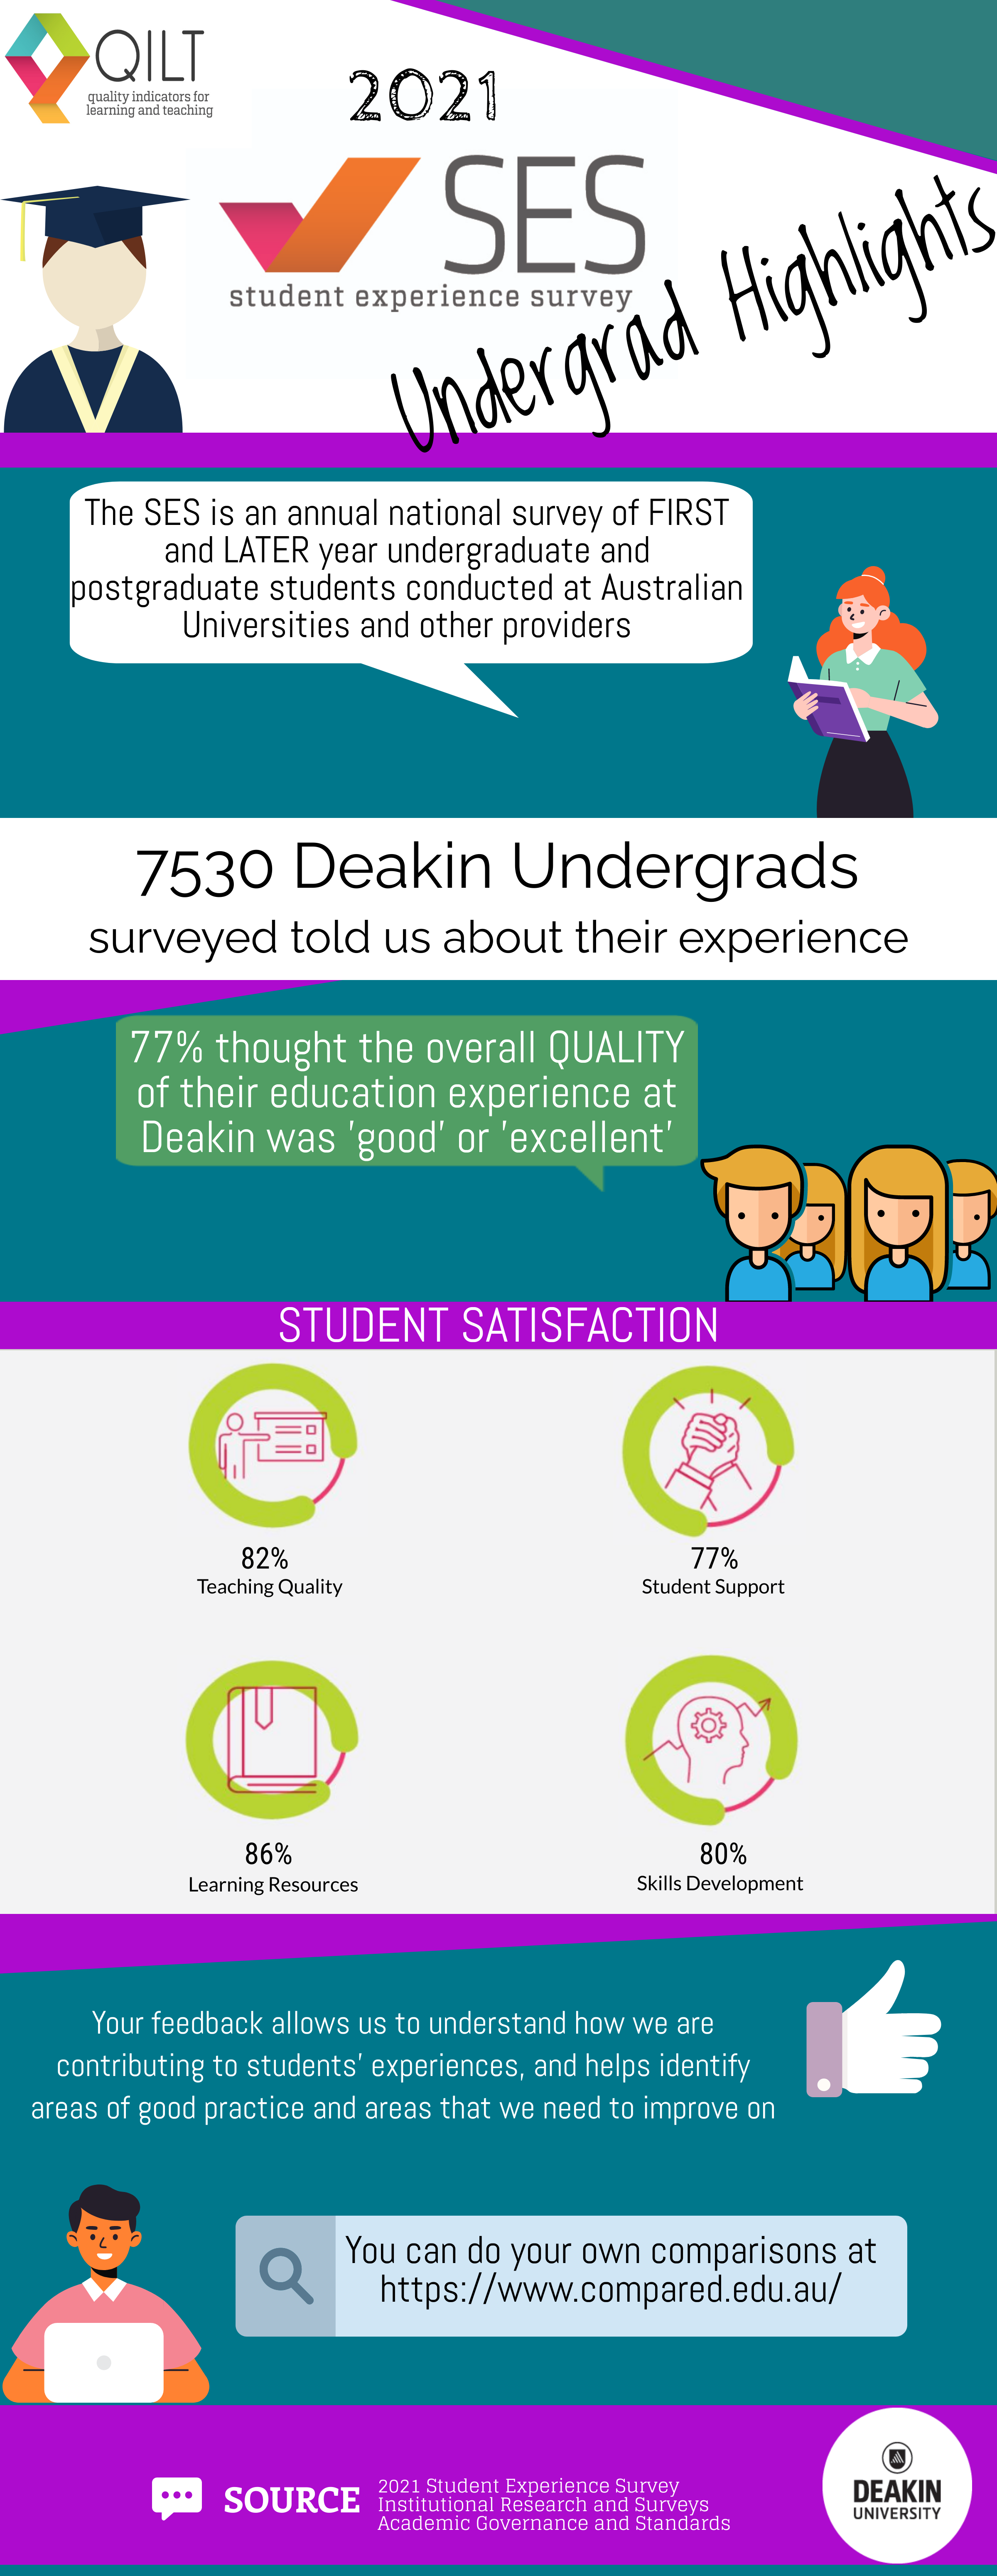 2021 Student experience survey undergrad highlights infographic, see second tab for text version